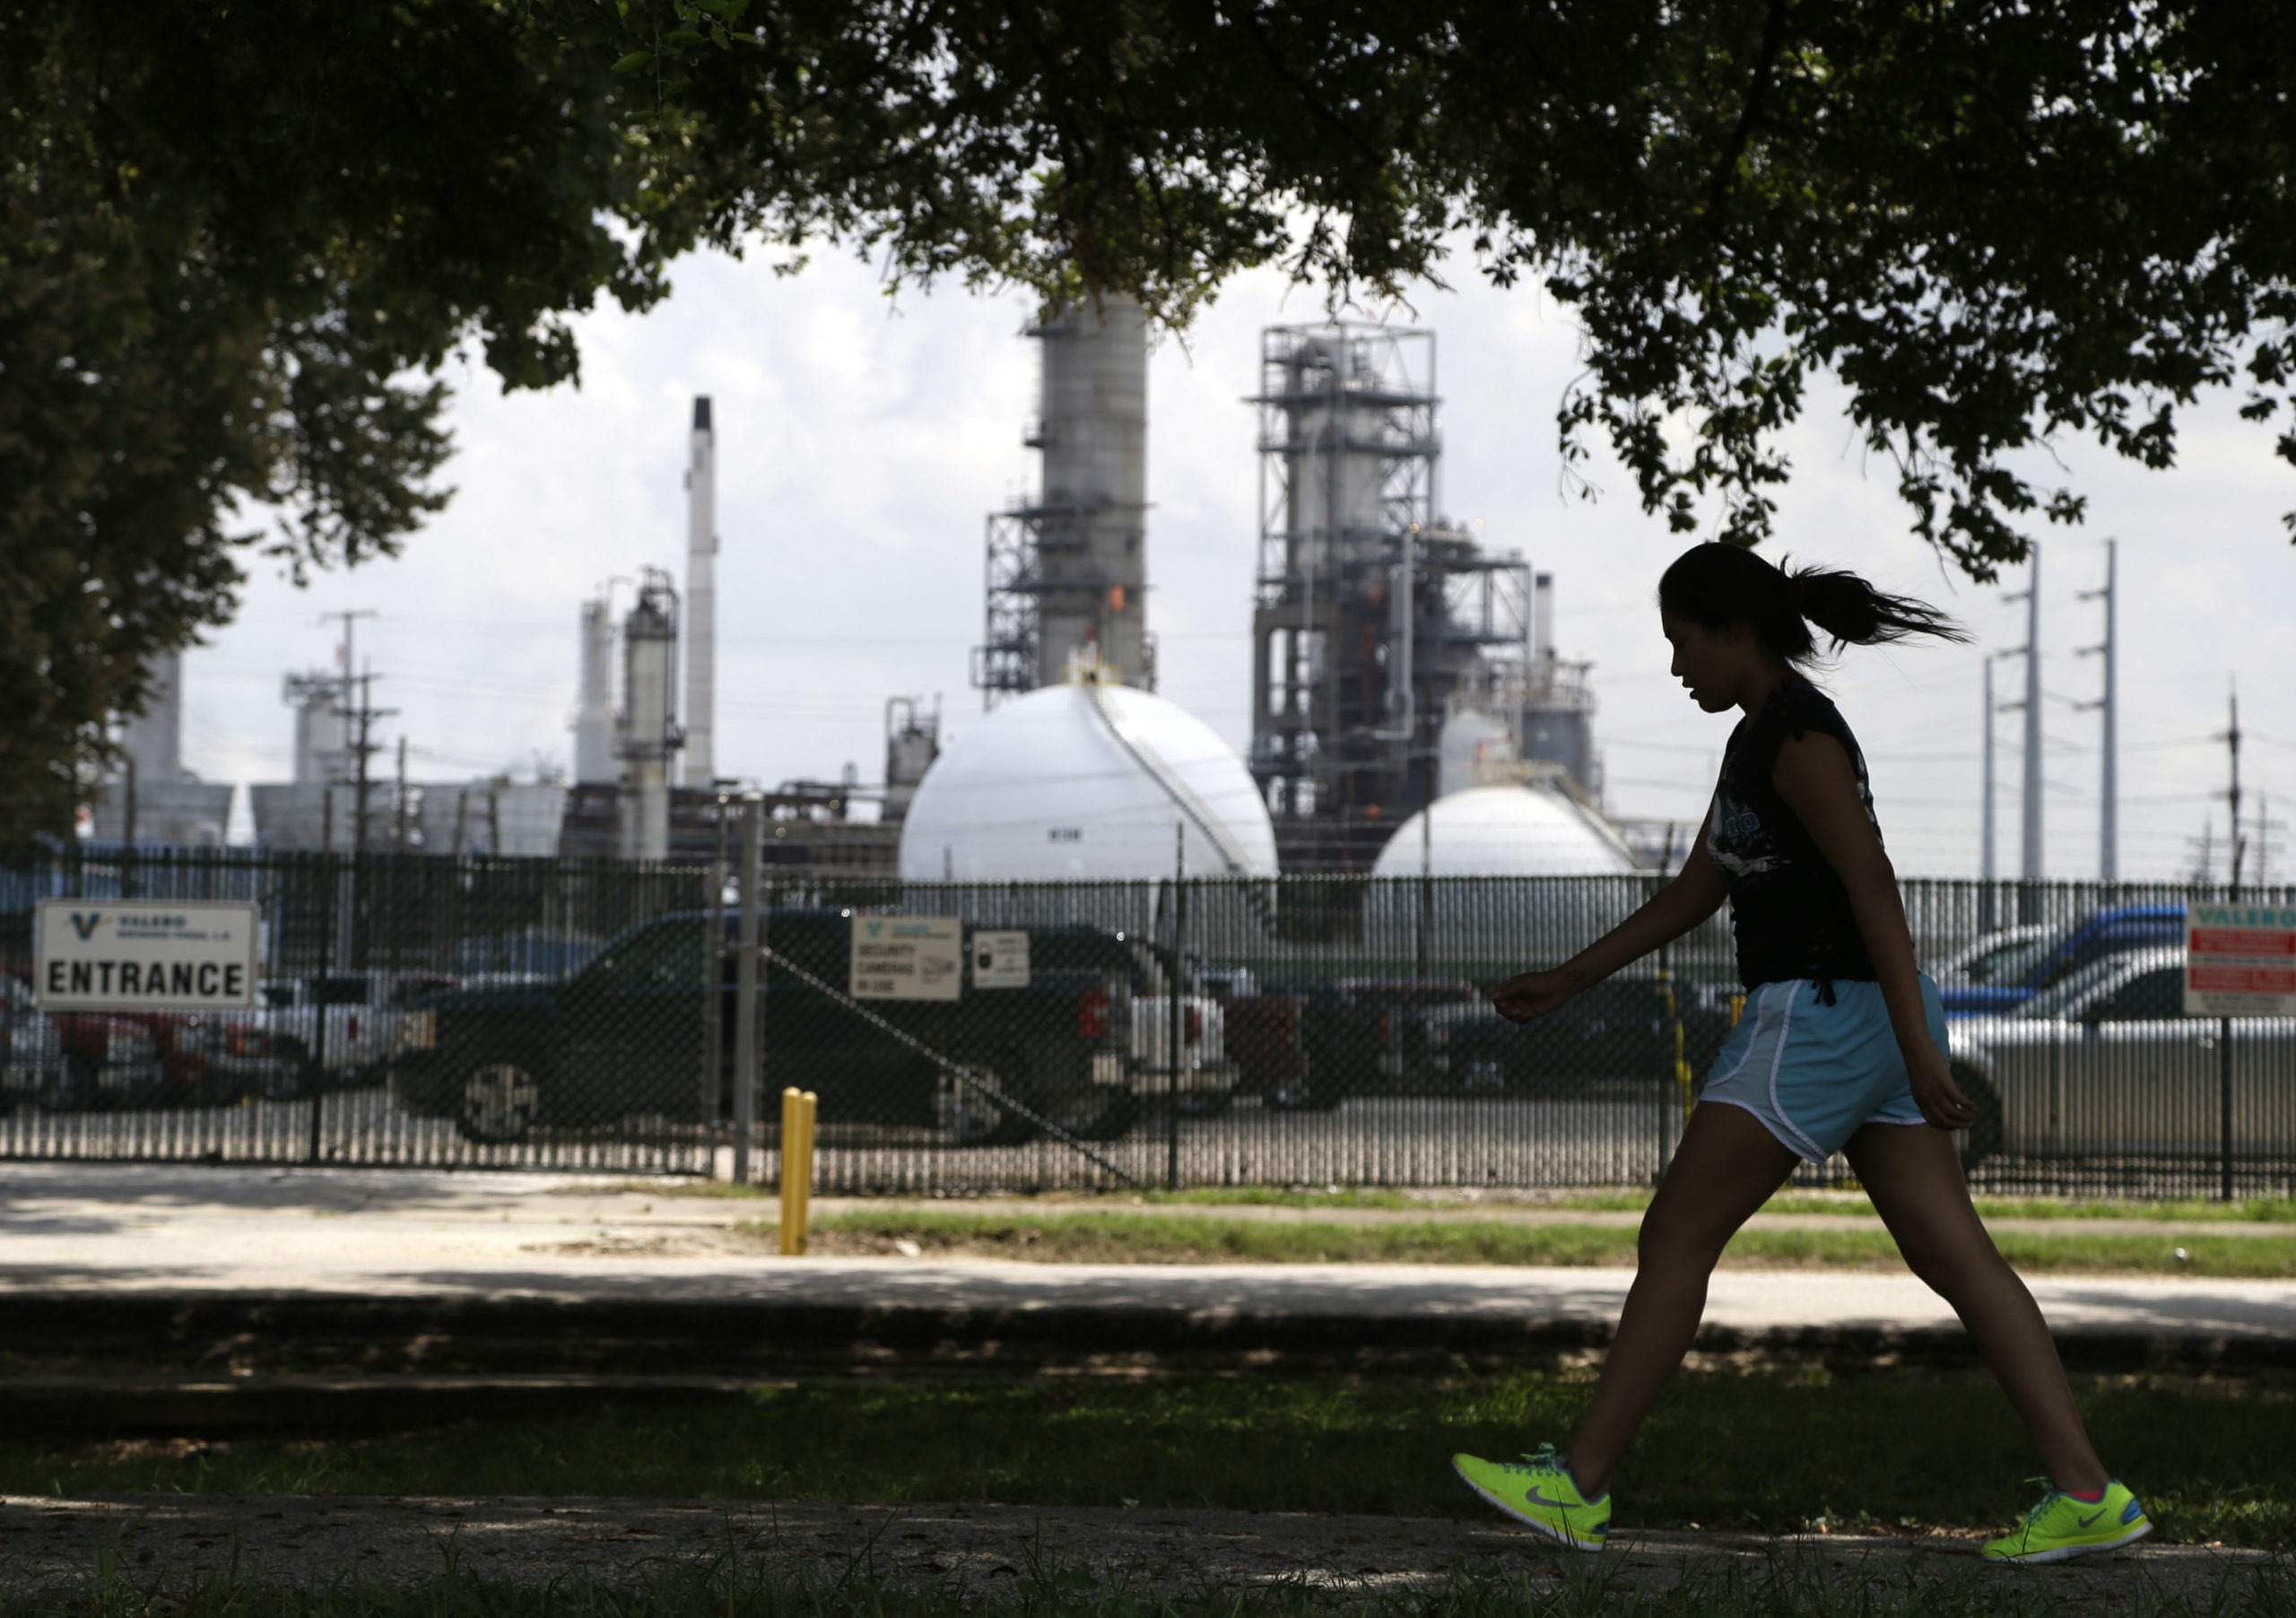 A teenage girl walks around the track of a park across the street from the Valero refinery Monday, Aug. 4, 2014, in the Manchester neighborhood of Houston.